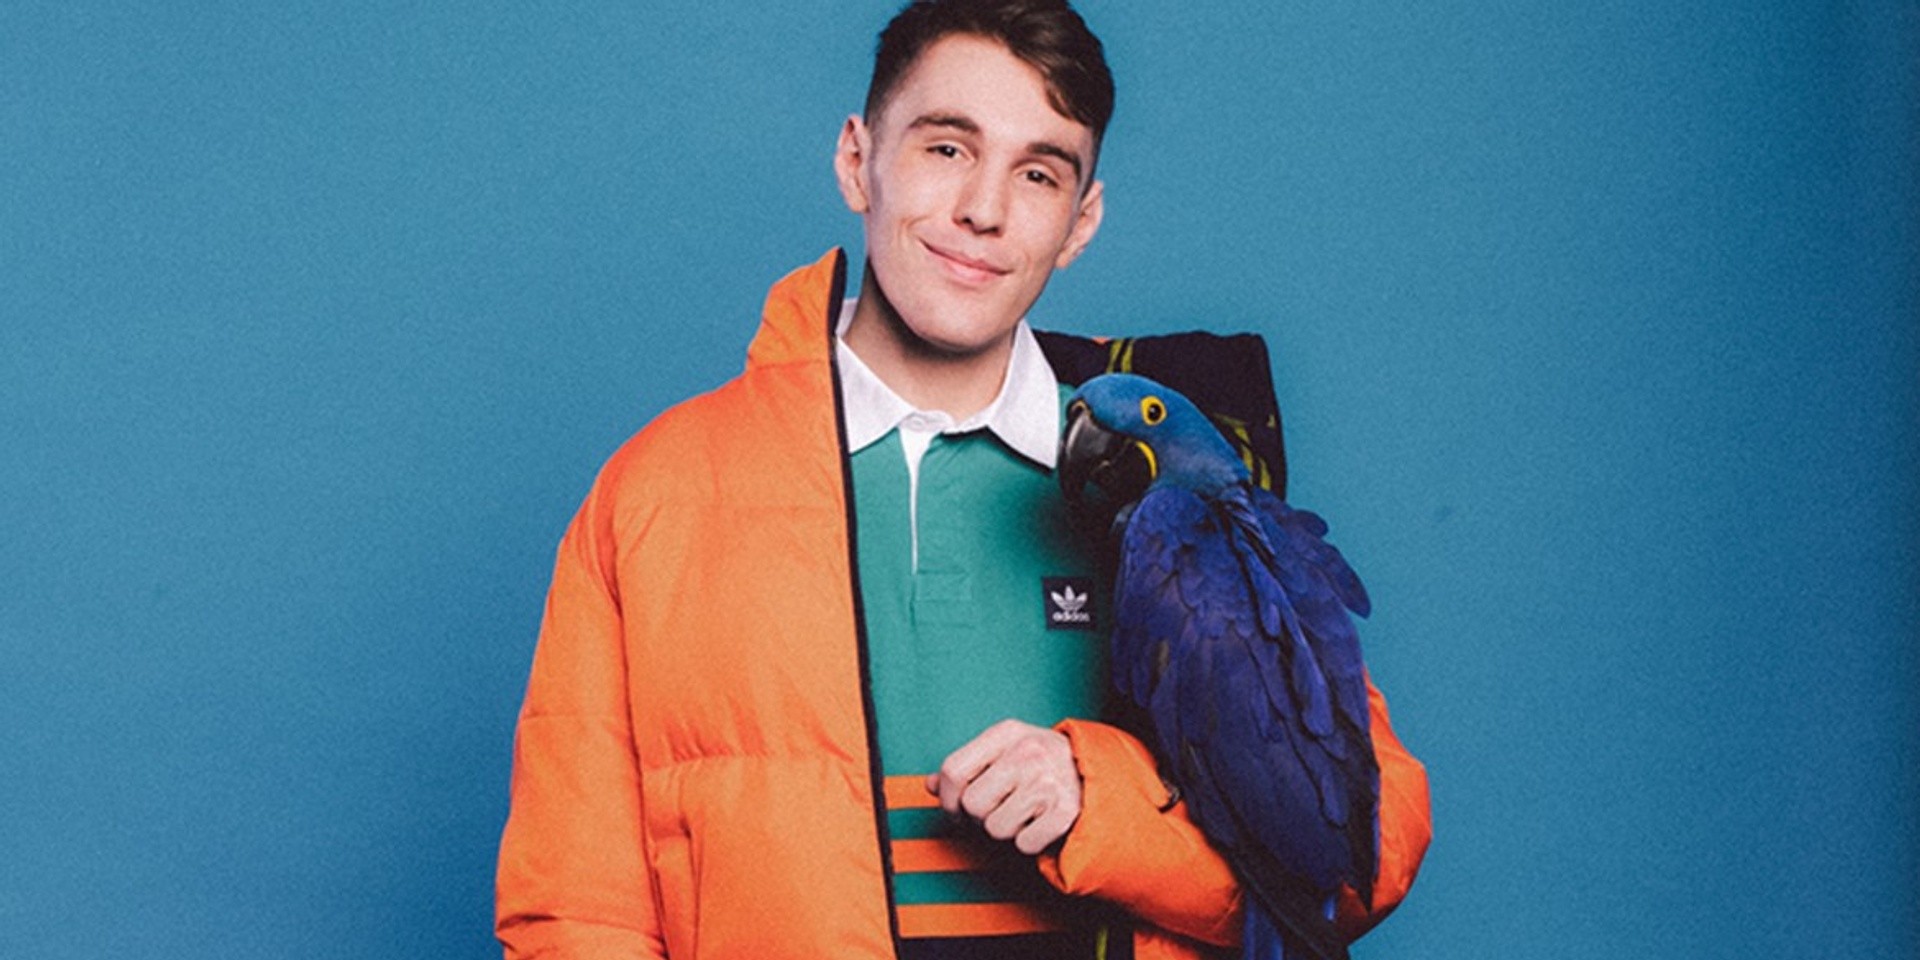 “We made the beat and wrote it all on the same FaceTime call”: An interview with Yung Bae